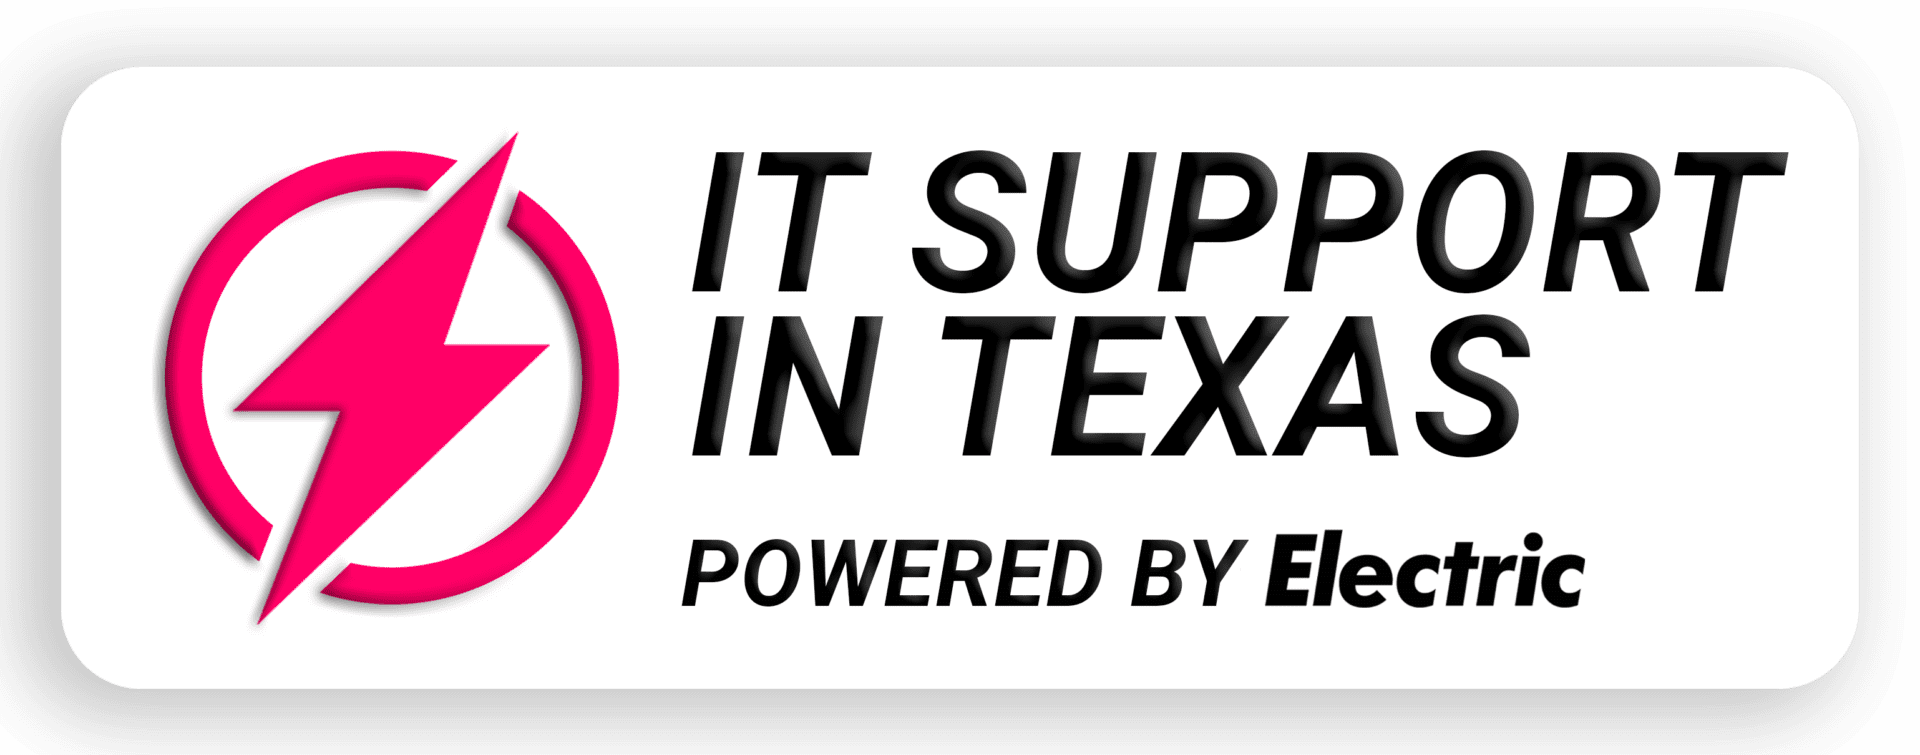 IT Support in Texas Powered by Electric